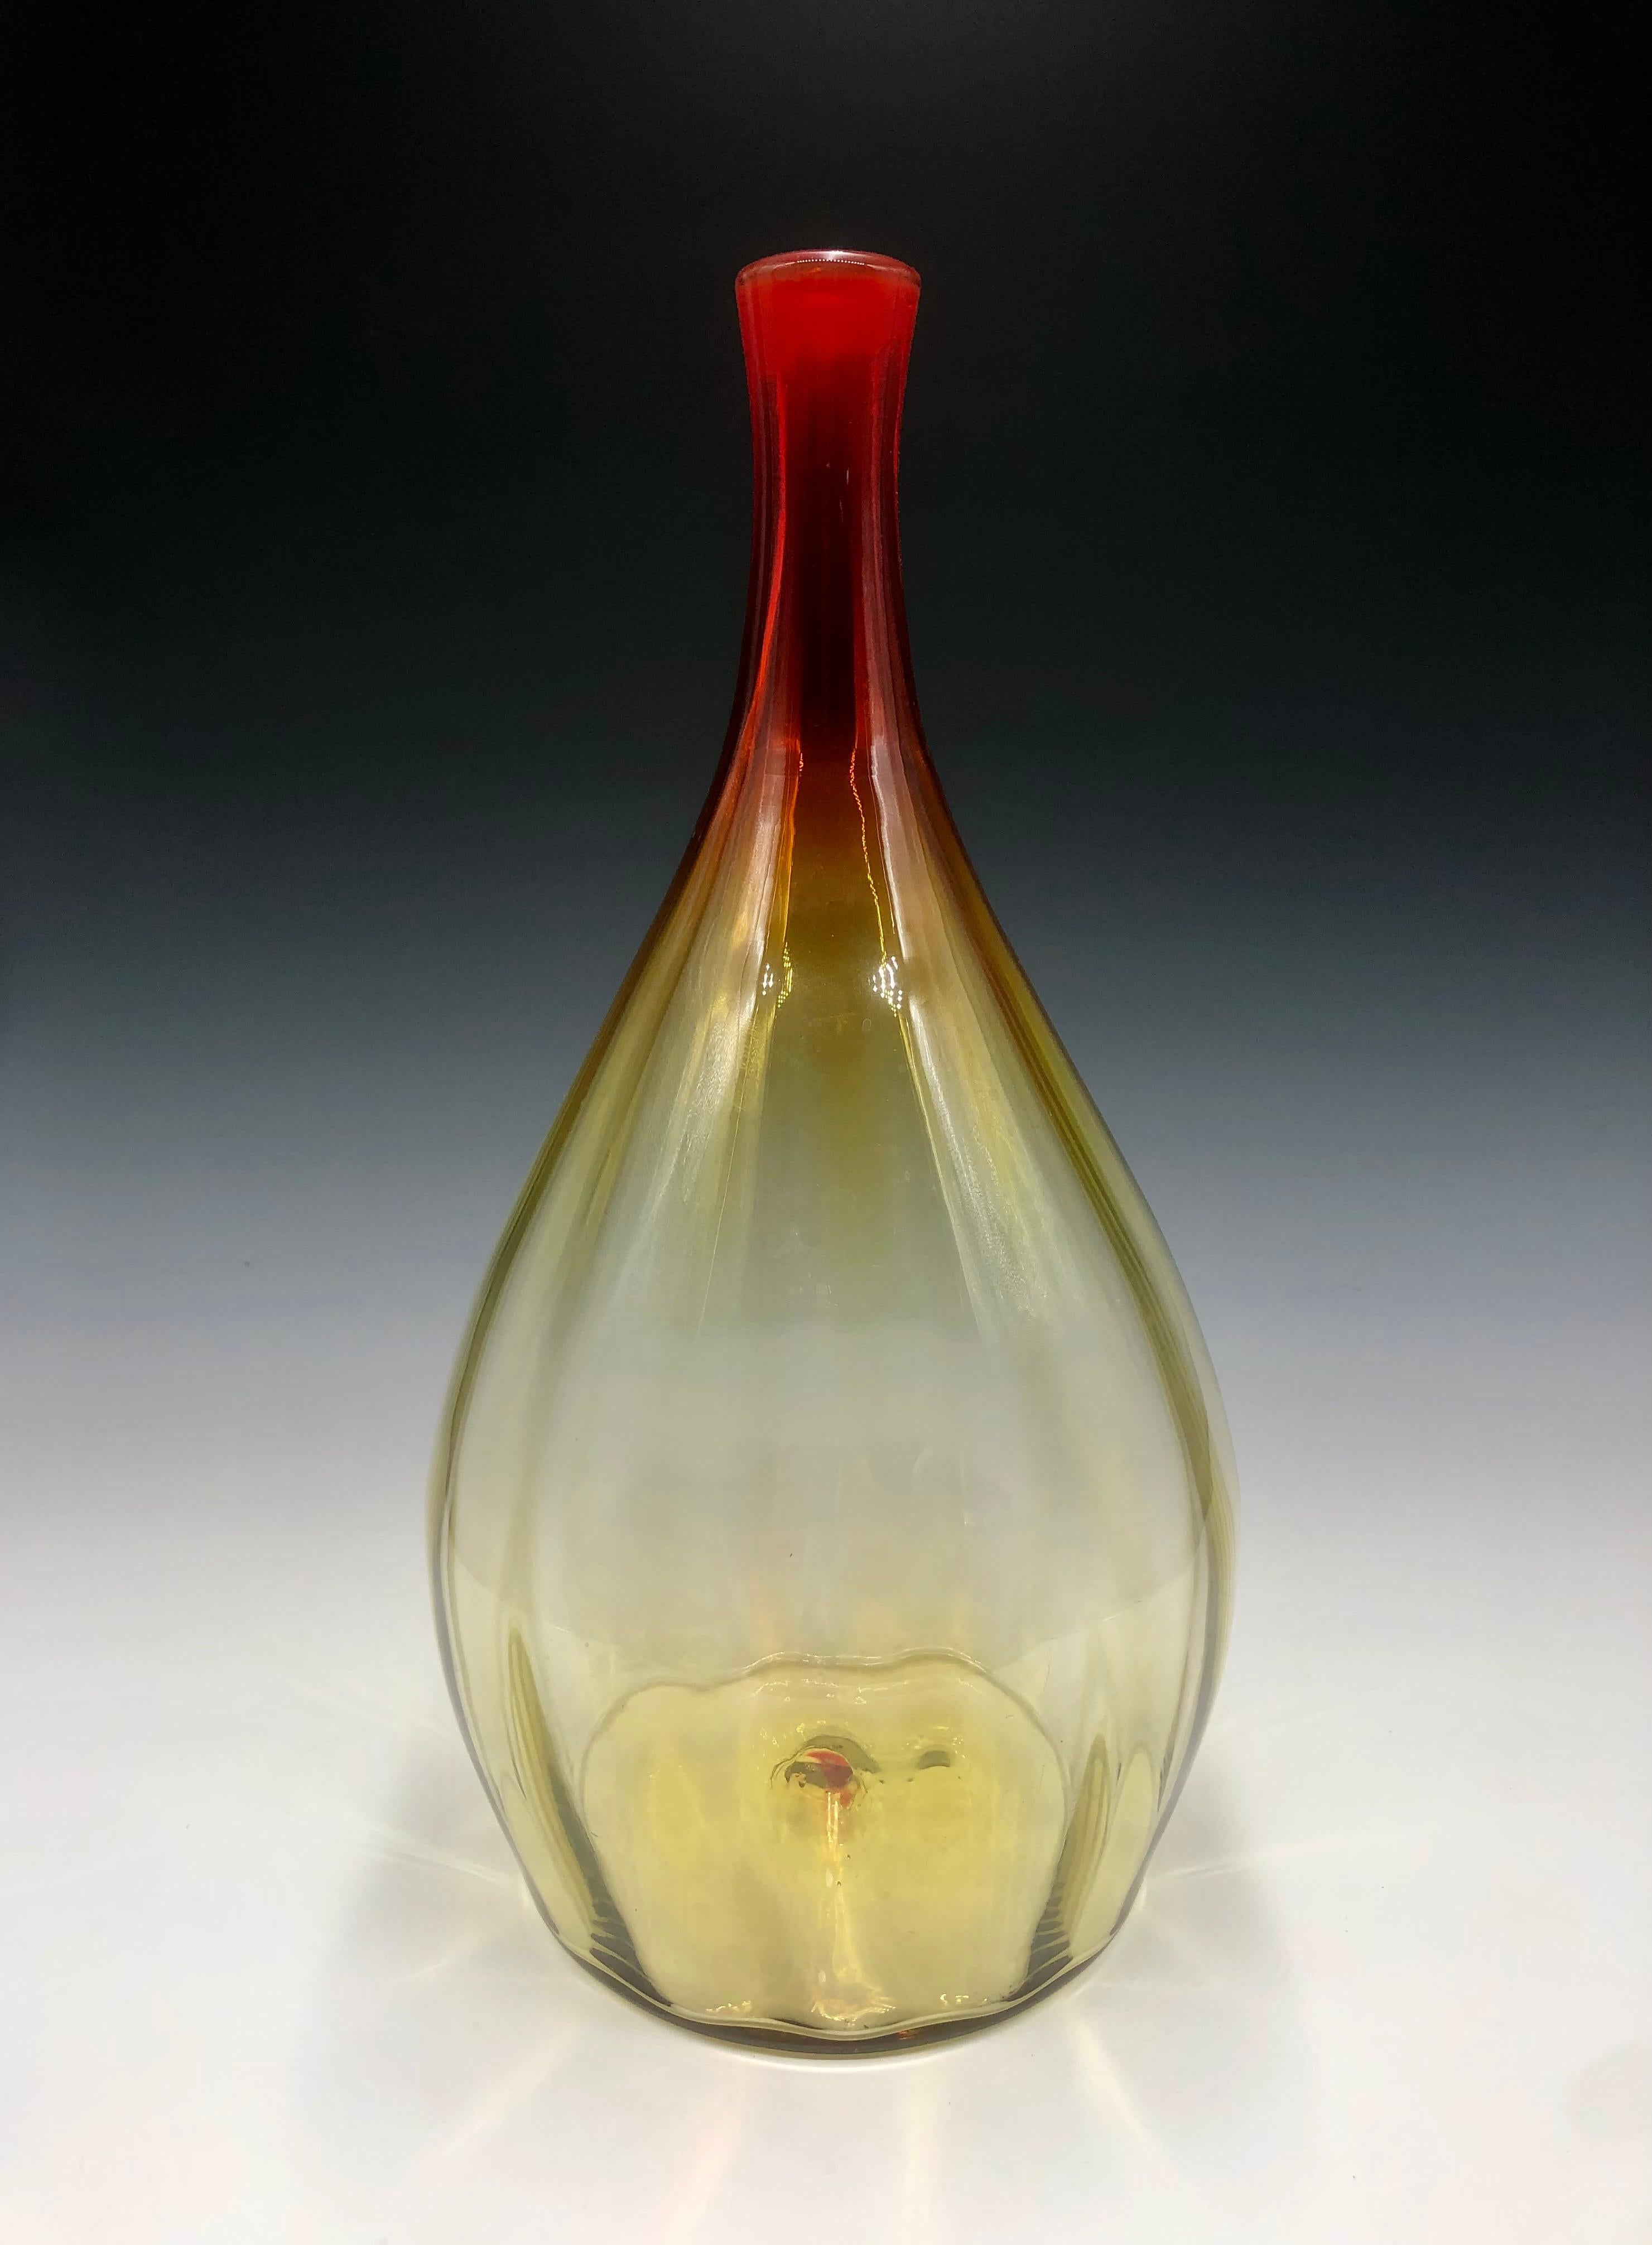 Gorgeous mid-century modern large oversized Blenko Amberina hand-blown ribbed vase/vessel. A deep red neck that subtly transitions into a pale yellow body.

Size: 17.5